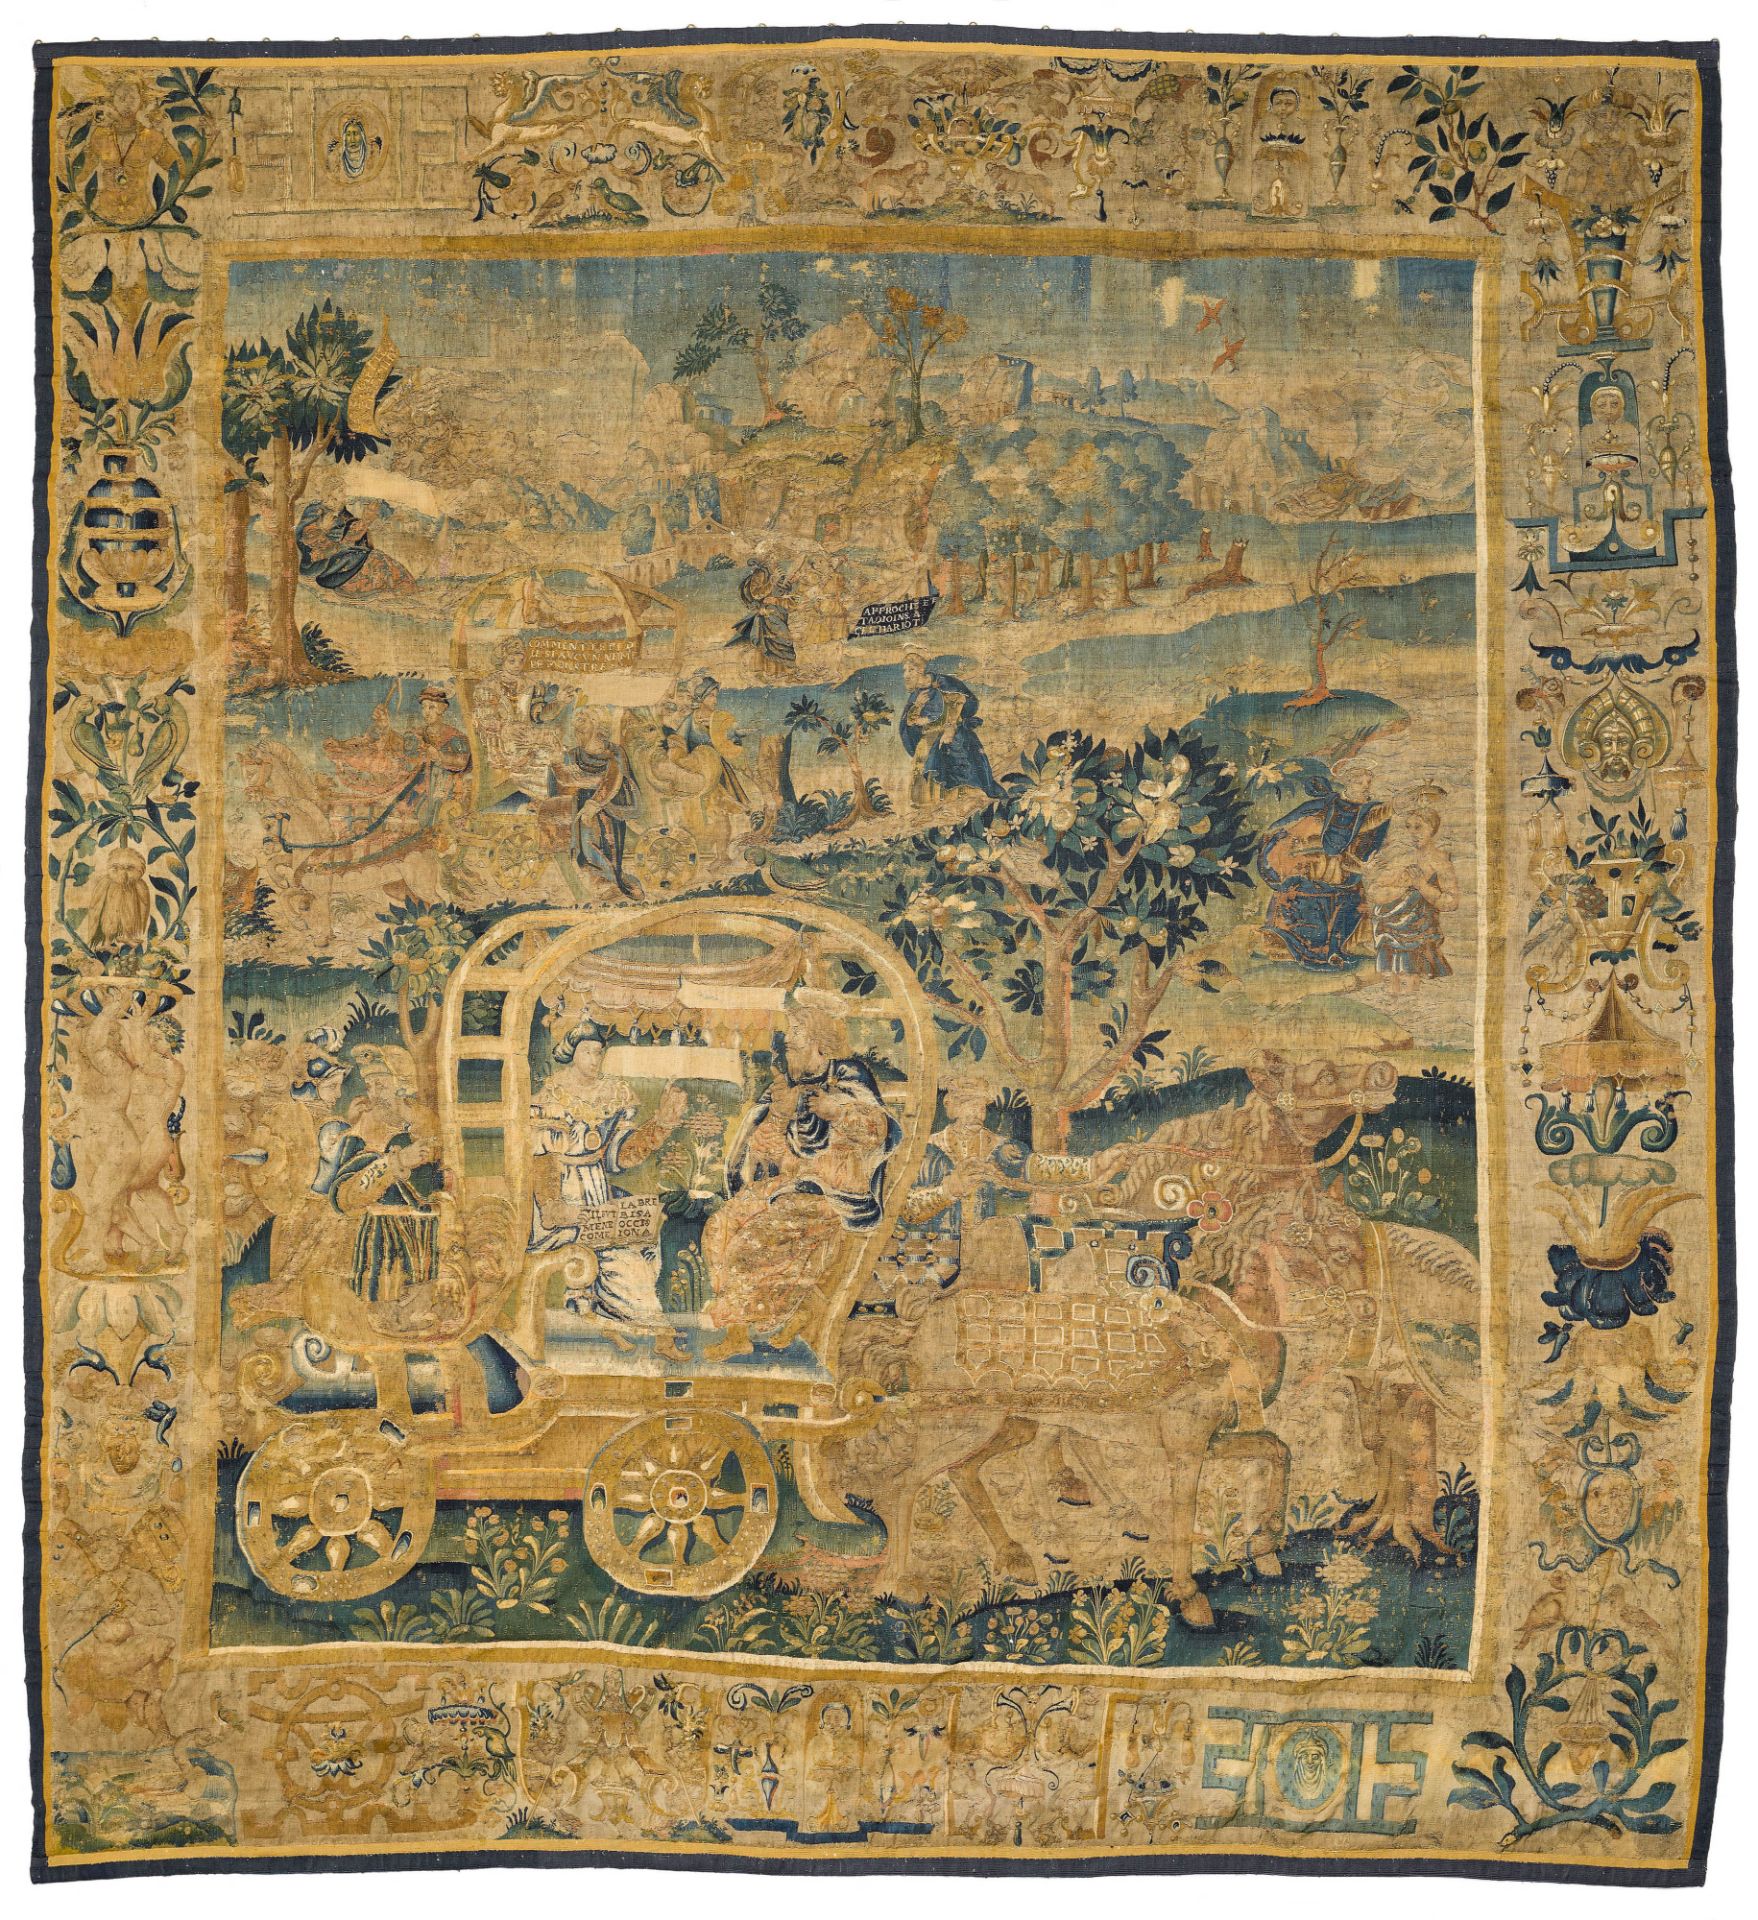 LARGE TAPESTRY "THE STORY OF PHILIPPUS"